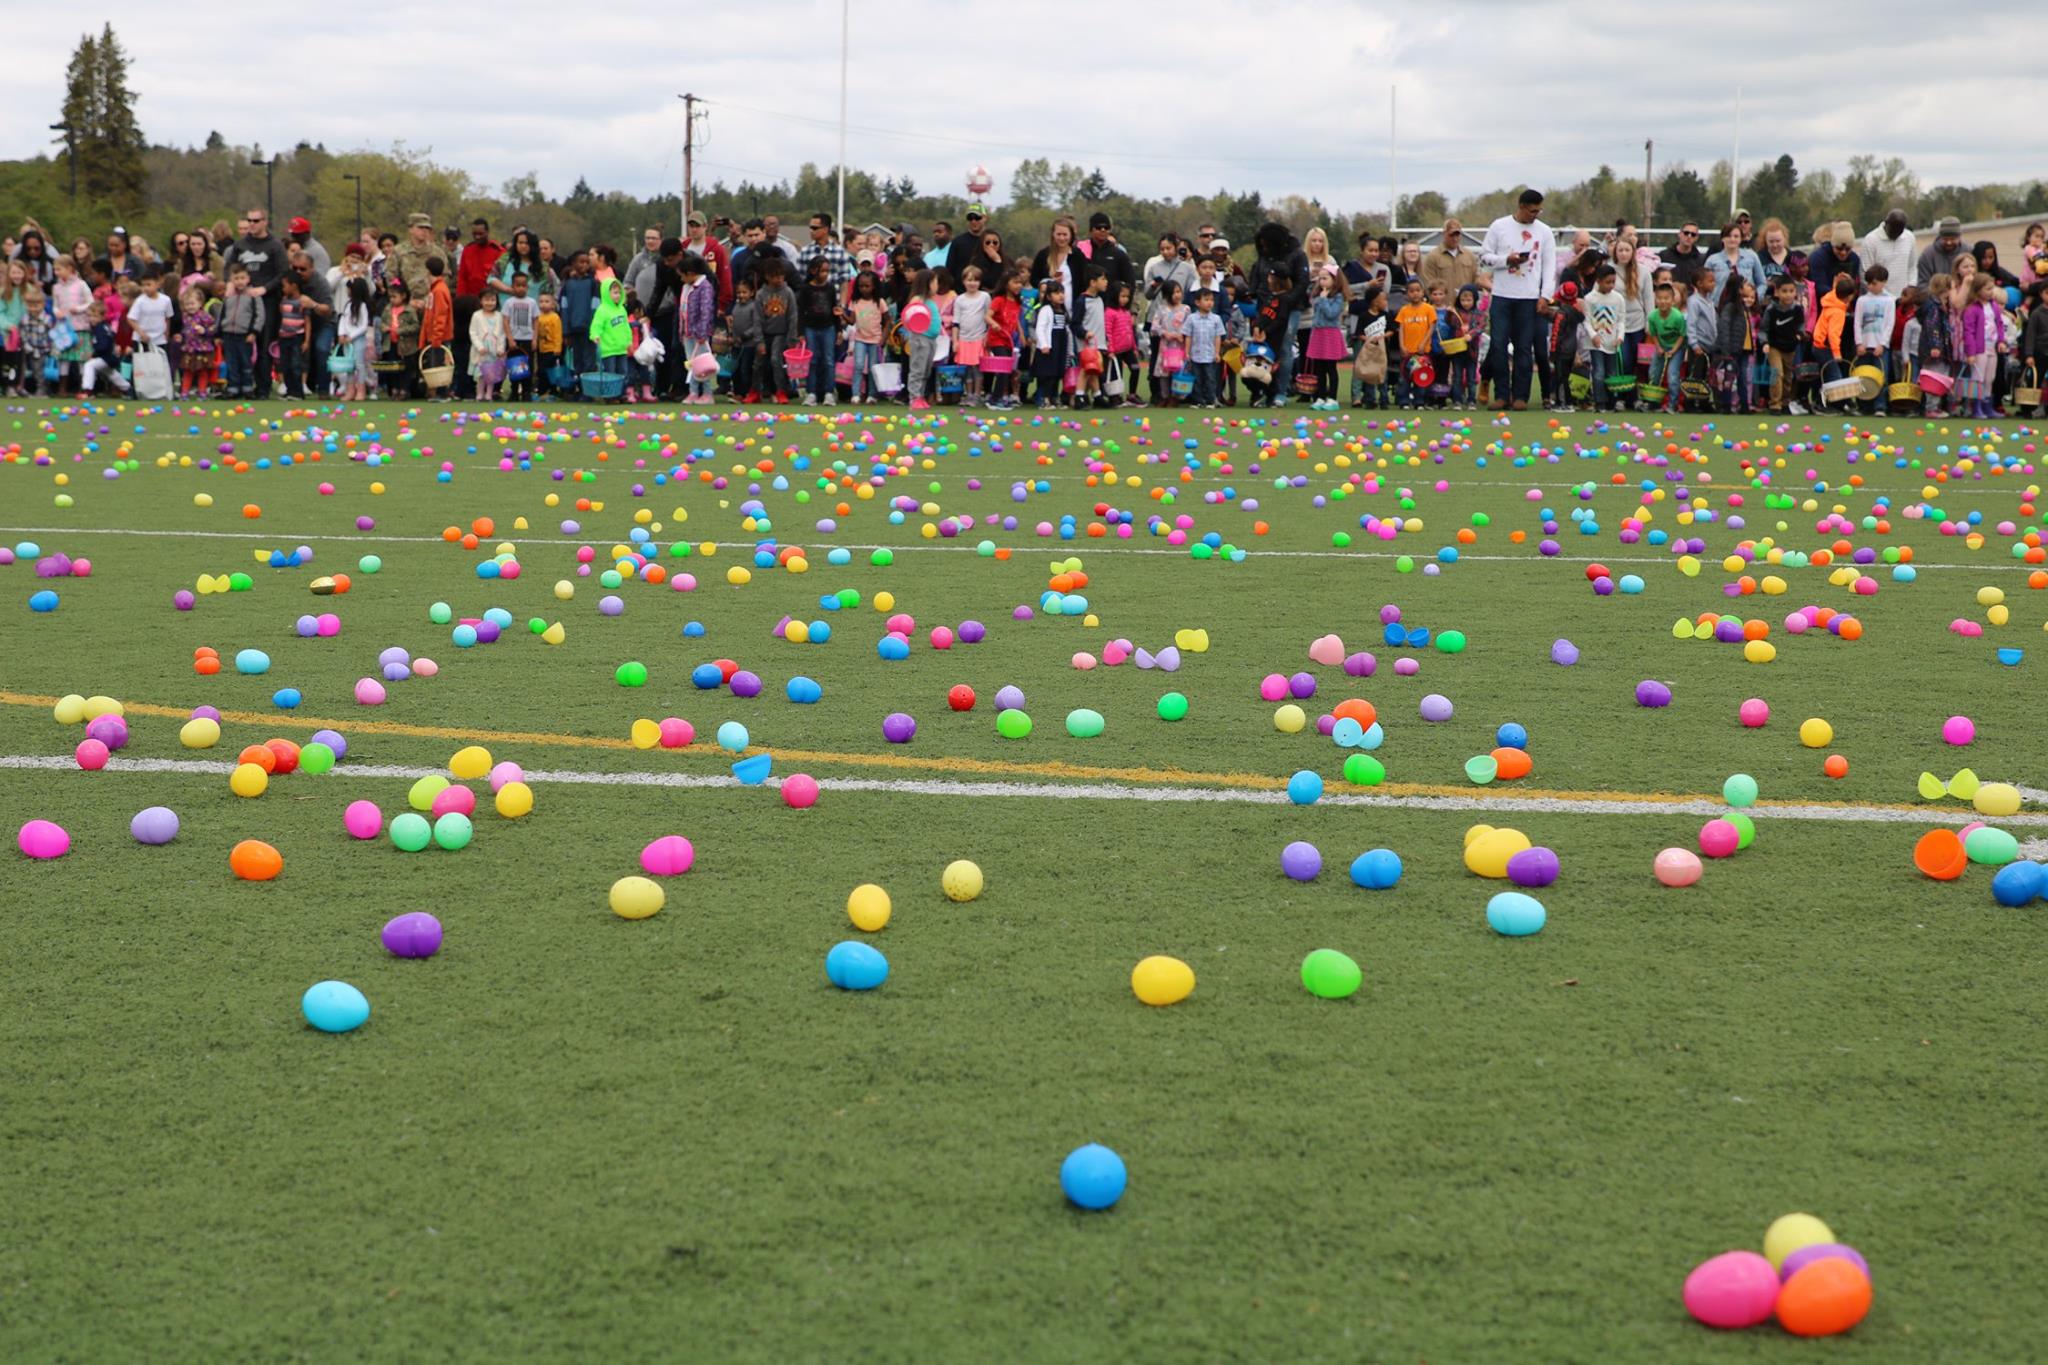 2022 Easter Egg Hunts and Activities in Pierce County - SouthSoundTalk